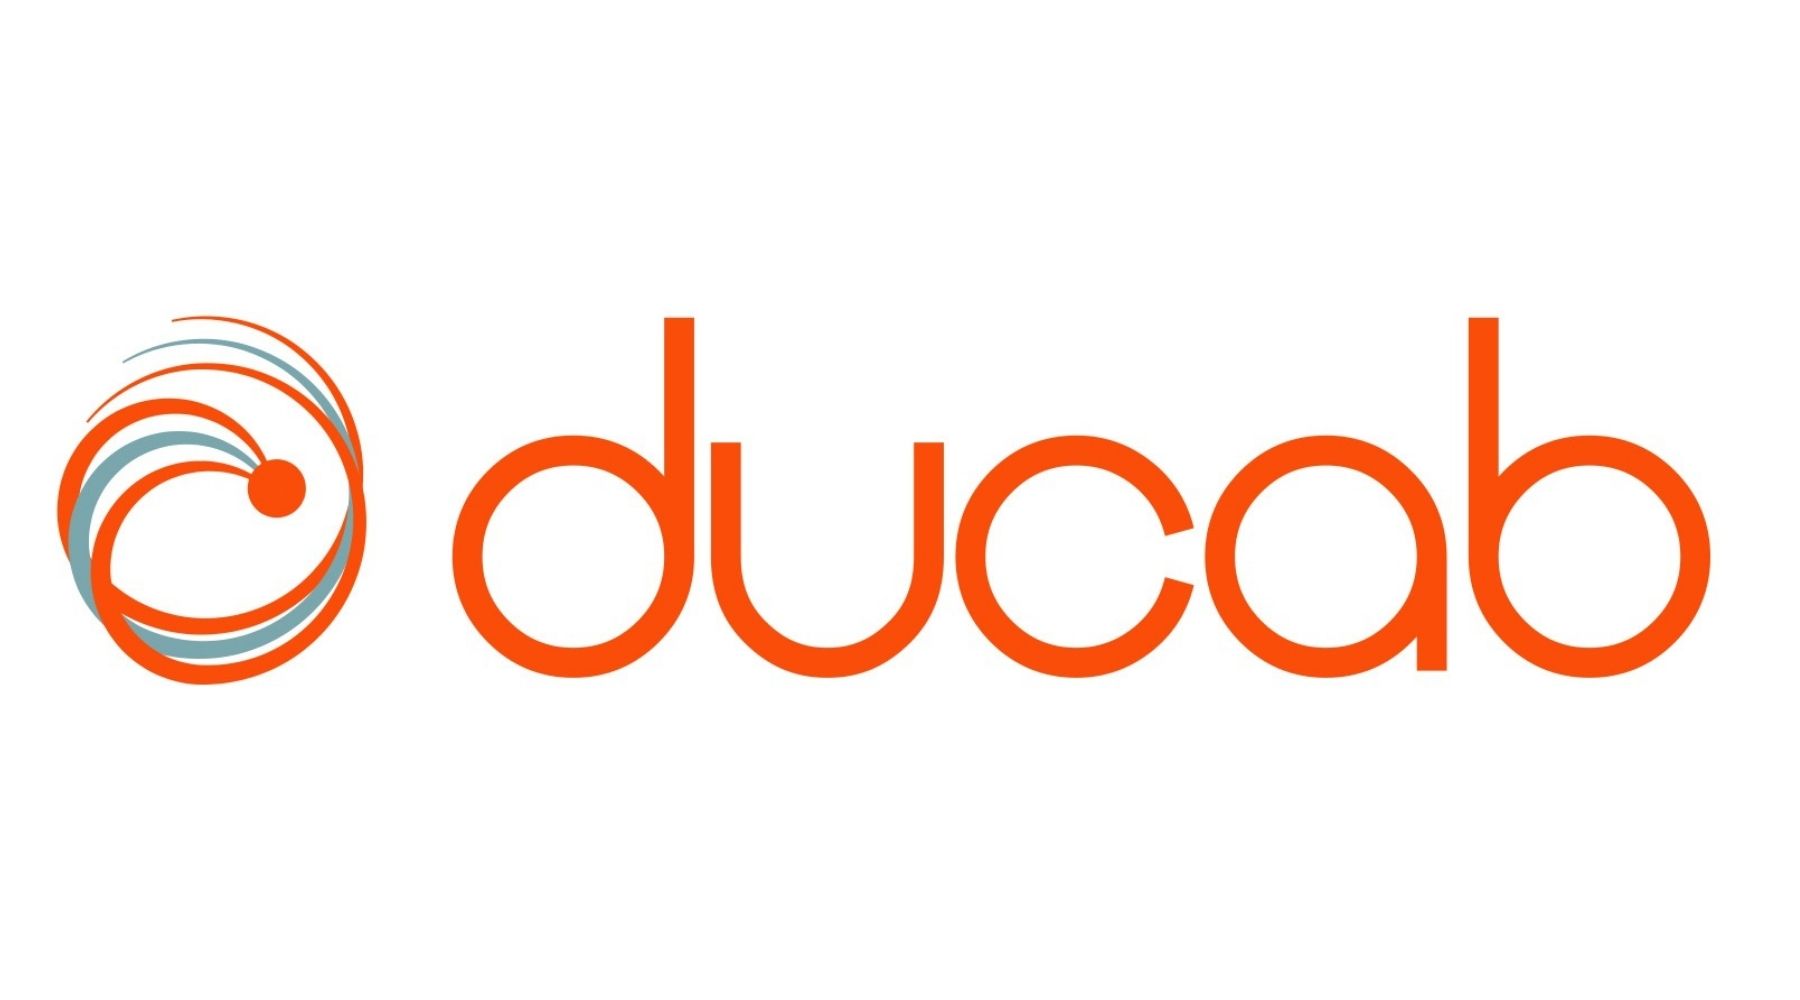 Ducab Revamps Action Towards Green Energy and Sustainability